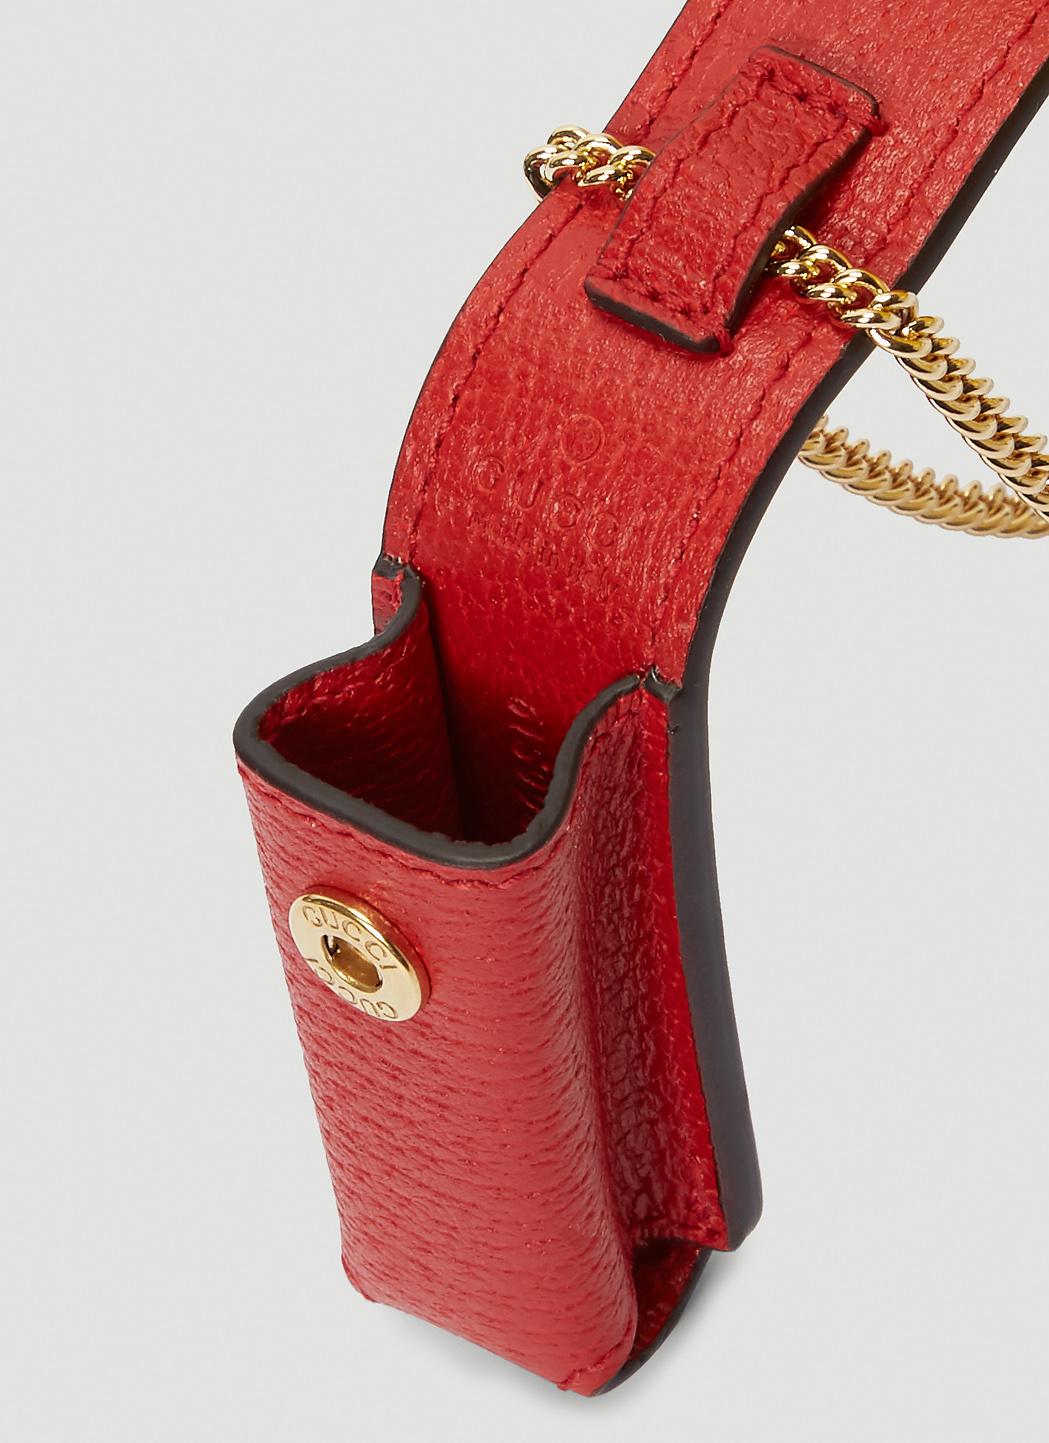 GUCCI Porte Rouges Red Leather Lipstick Holder Chain Necklace FULL SET-  NEW!!